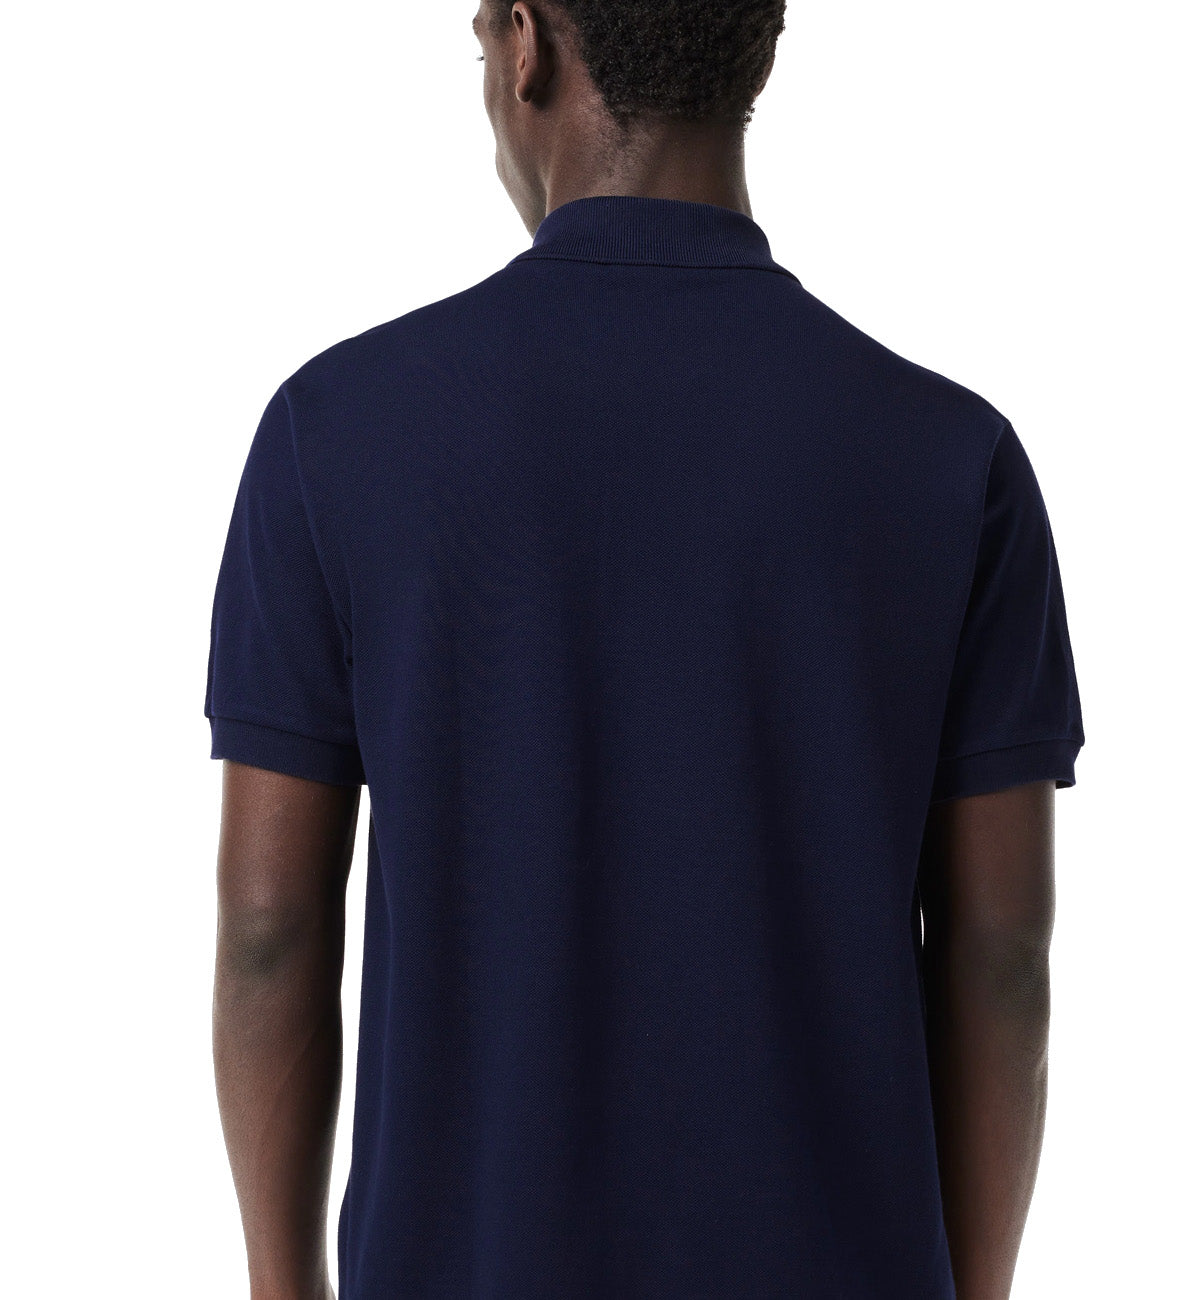 Lacoste Classic Fit Cotton Polo Shirt (Navy)